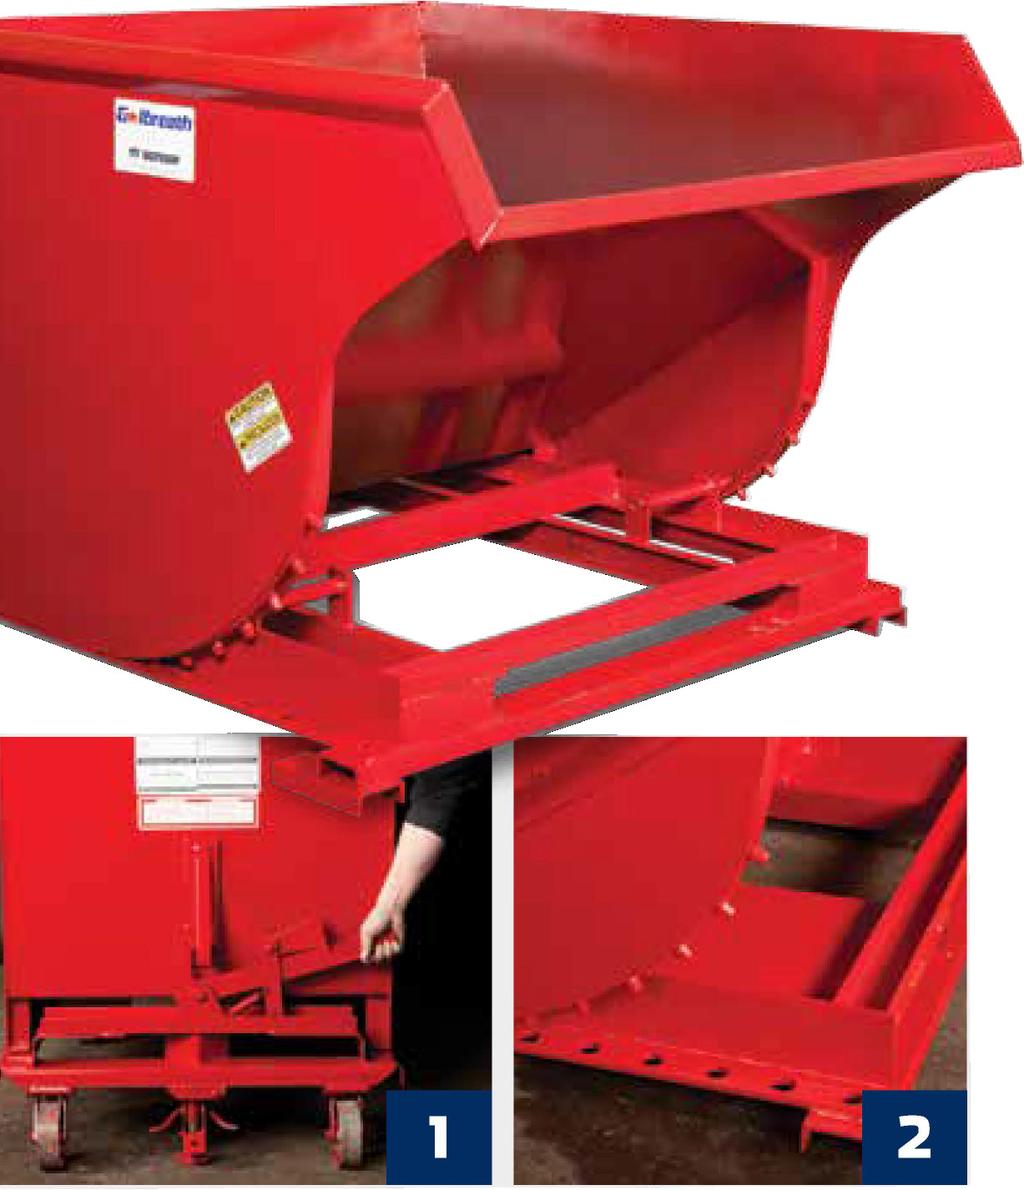 SELF-DUMPING HOPPERS Wastequip hoppers are great for storing, transporting and dumping scrap and bulk material.